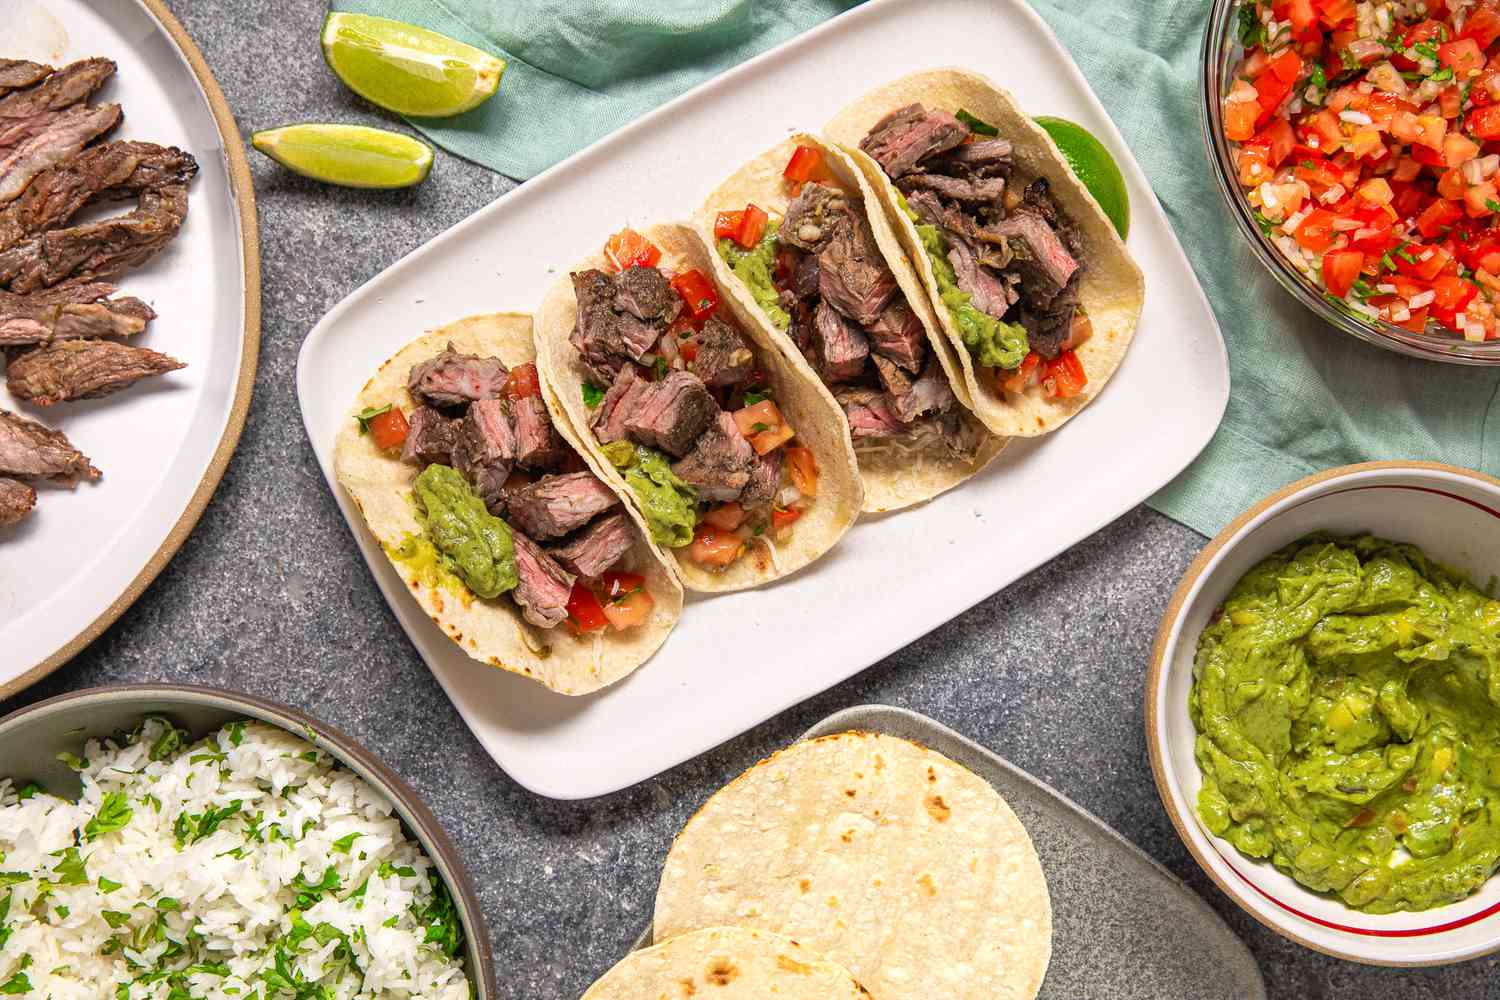 Platter of Arrachera (Mexican Skirt Steak) Tacos With Lime Wedges, and in the Surroundings, a Platter of Arrachera (Mexican Skirt Steak), a Bowl of Cilantro Rice, a Bowl of Salsa, a Bowl of Guacamole, and a Tray of Tortillas, All on a Light Teal Kitchen Towel